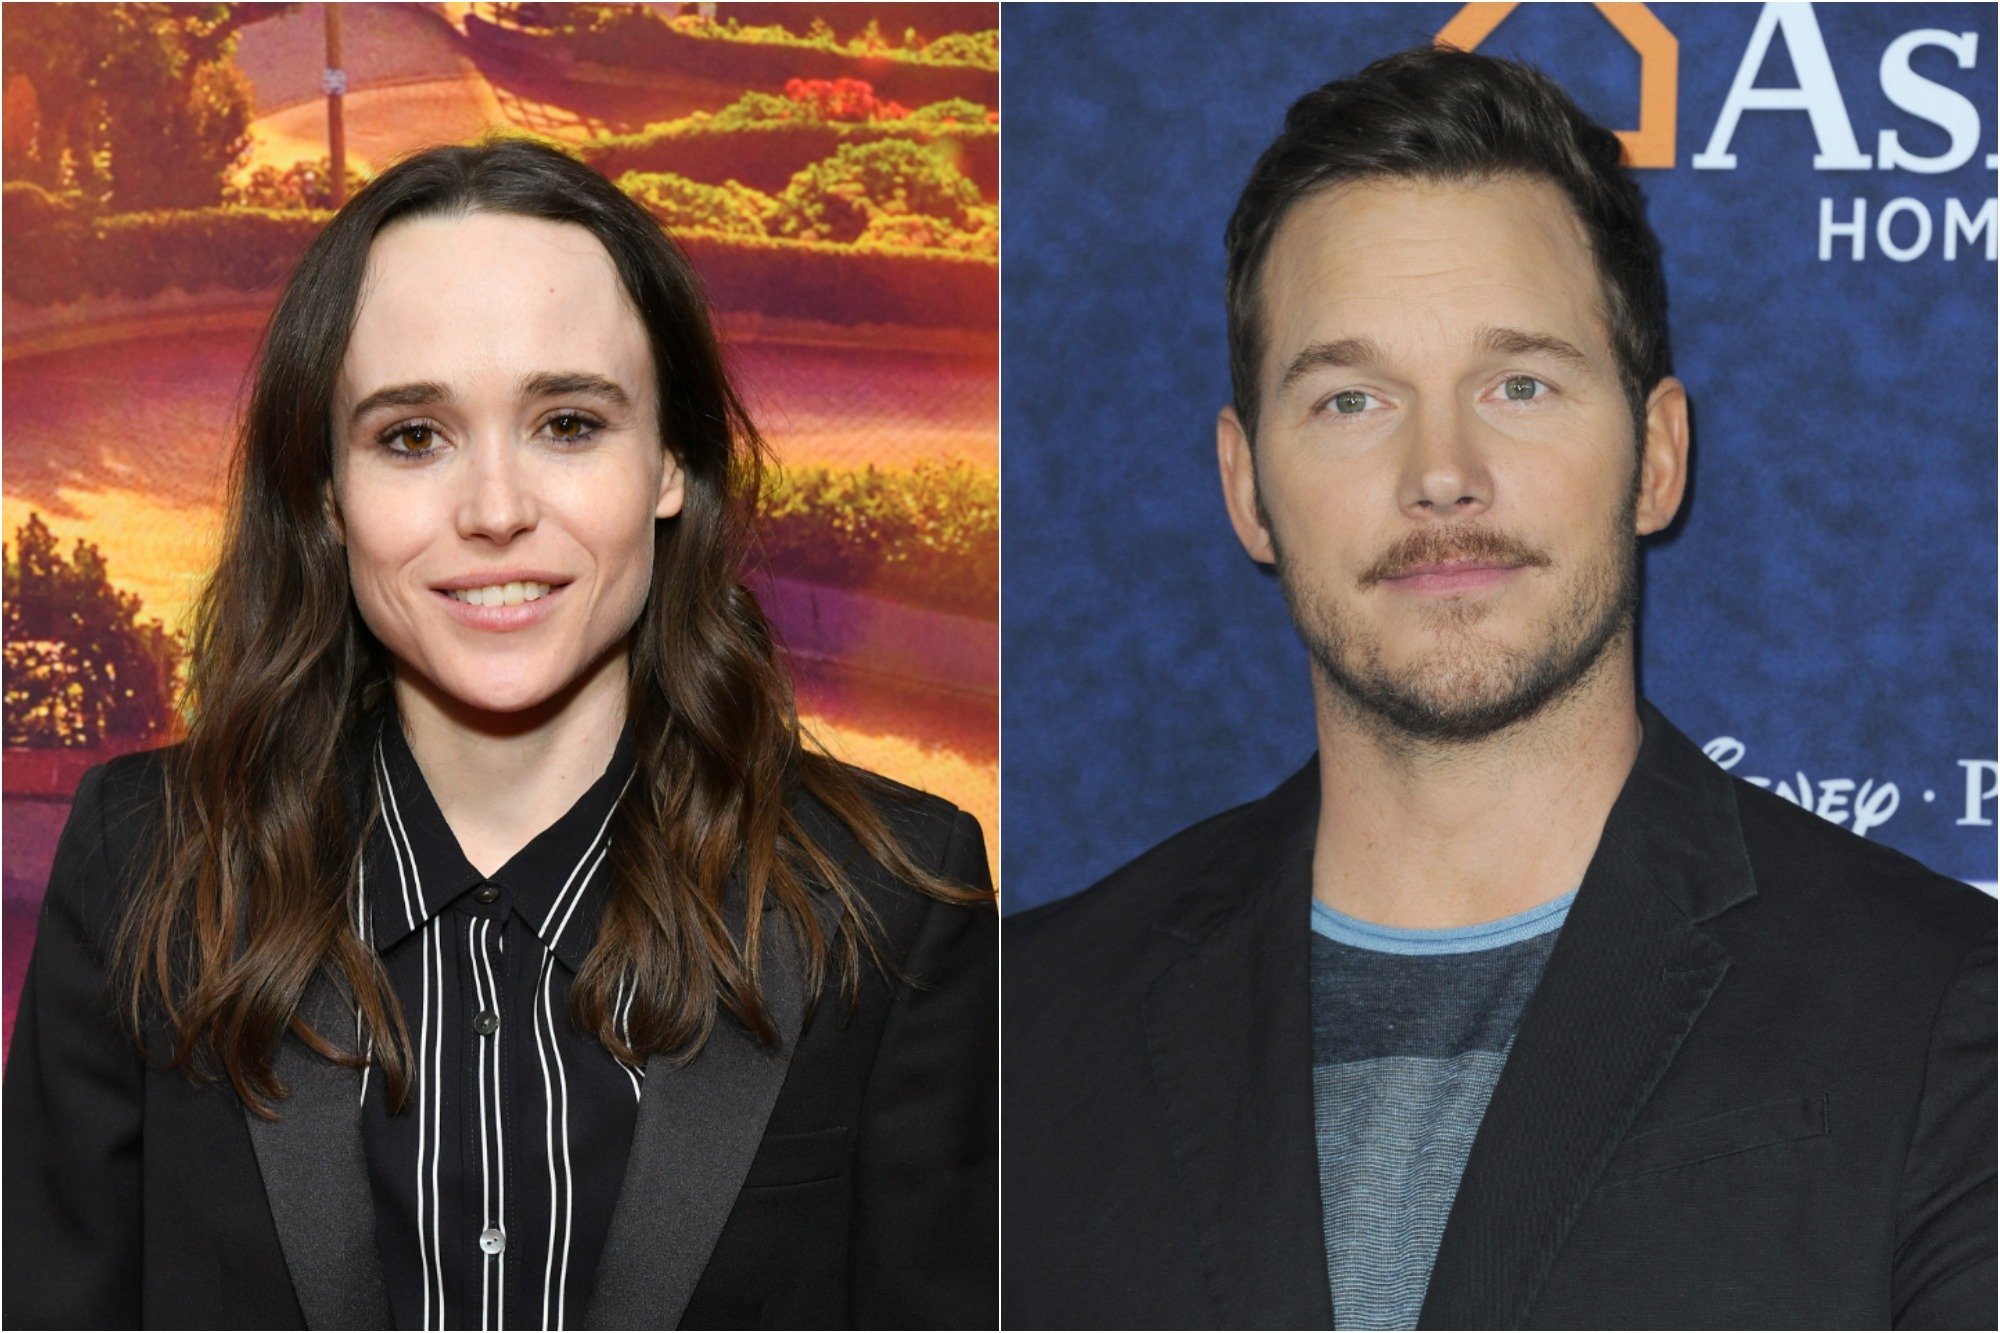 Ellen Page at the 'Tales of the City' New York premiere at The Metrograph on June 03, 2019 / Chris Pratt at the premiere of Disney And Pixar's 'Onward' at the El Capitan Theatre on February 18, 2020